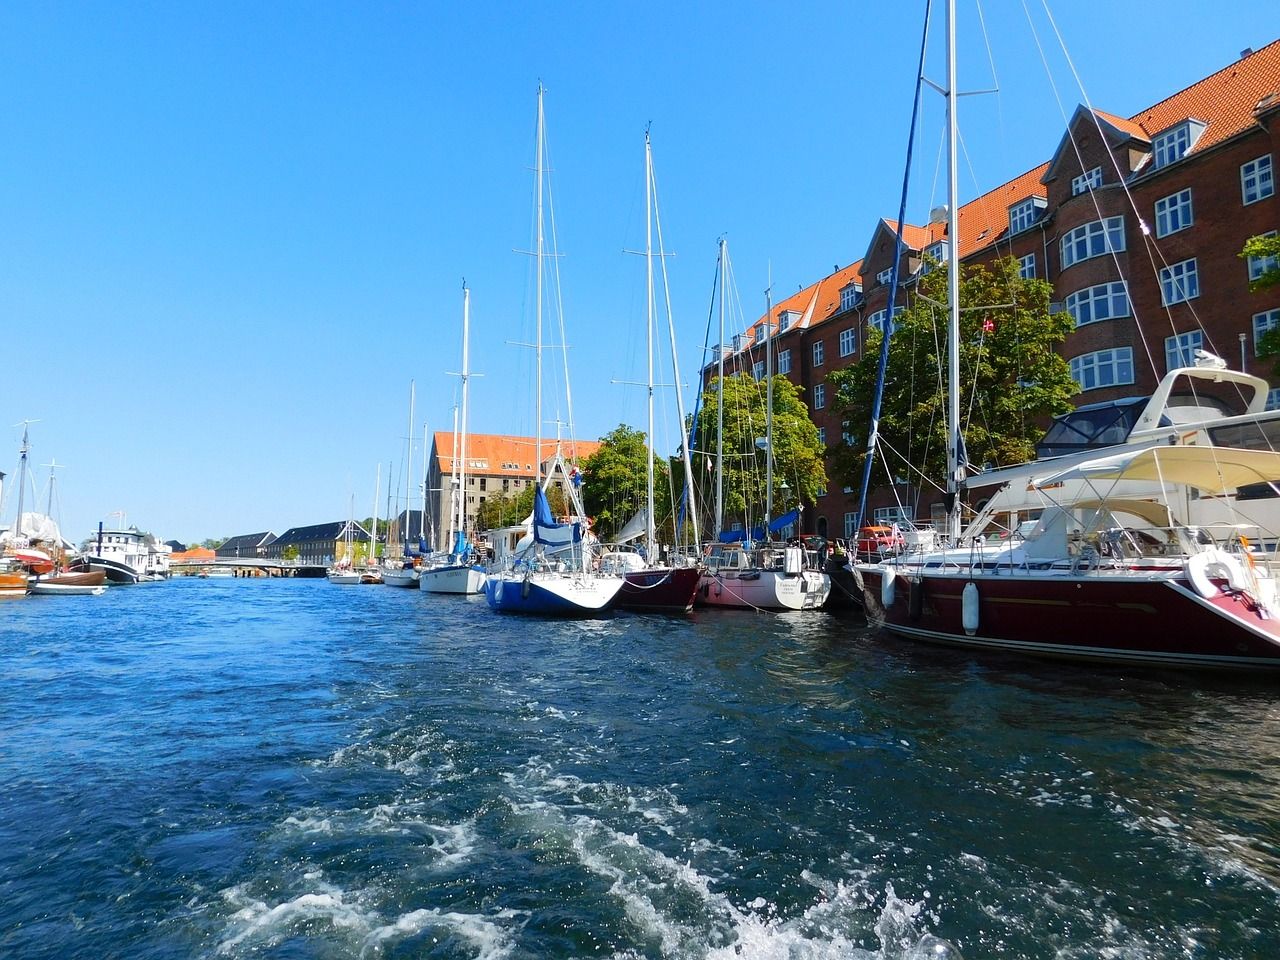 Copenhagen among the safest European cities to invest in property